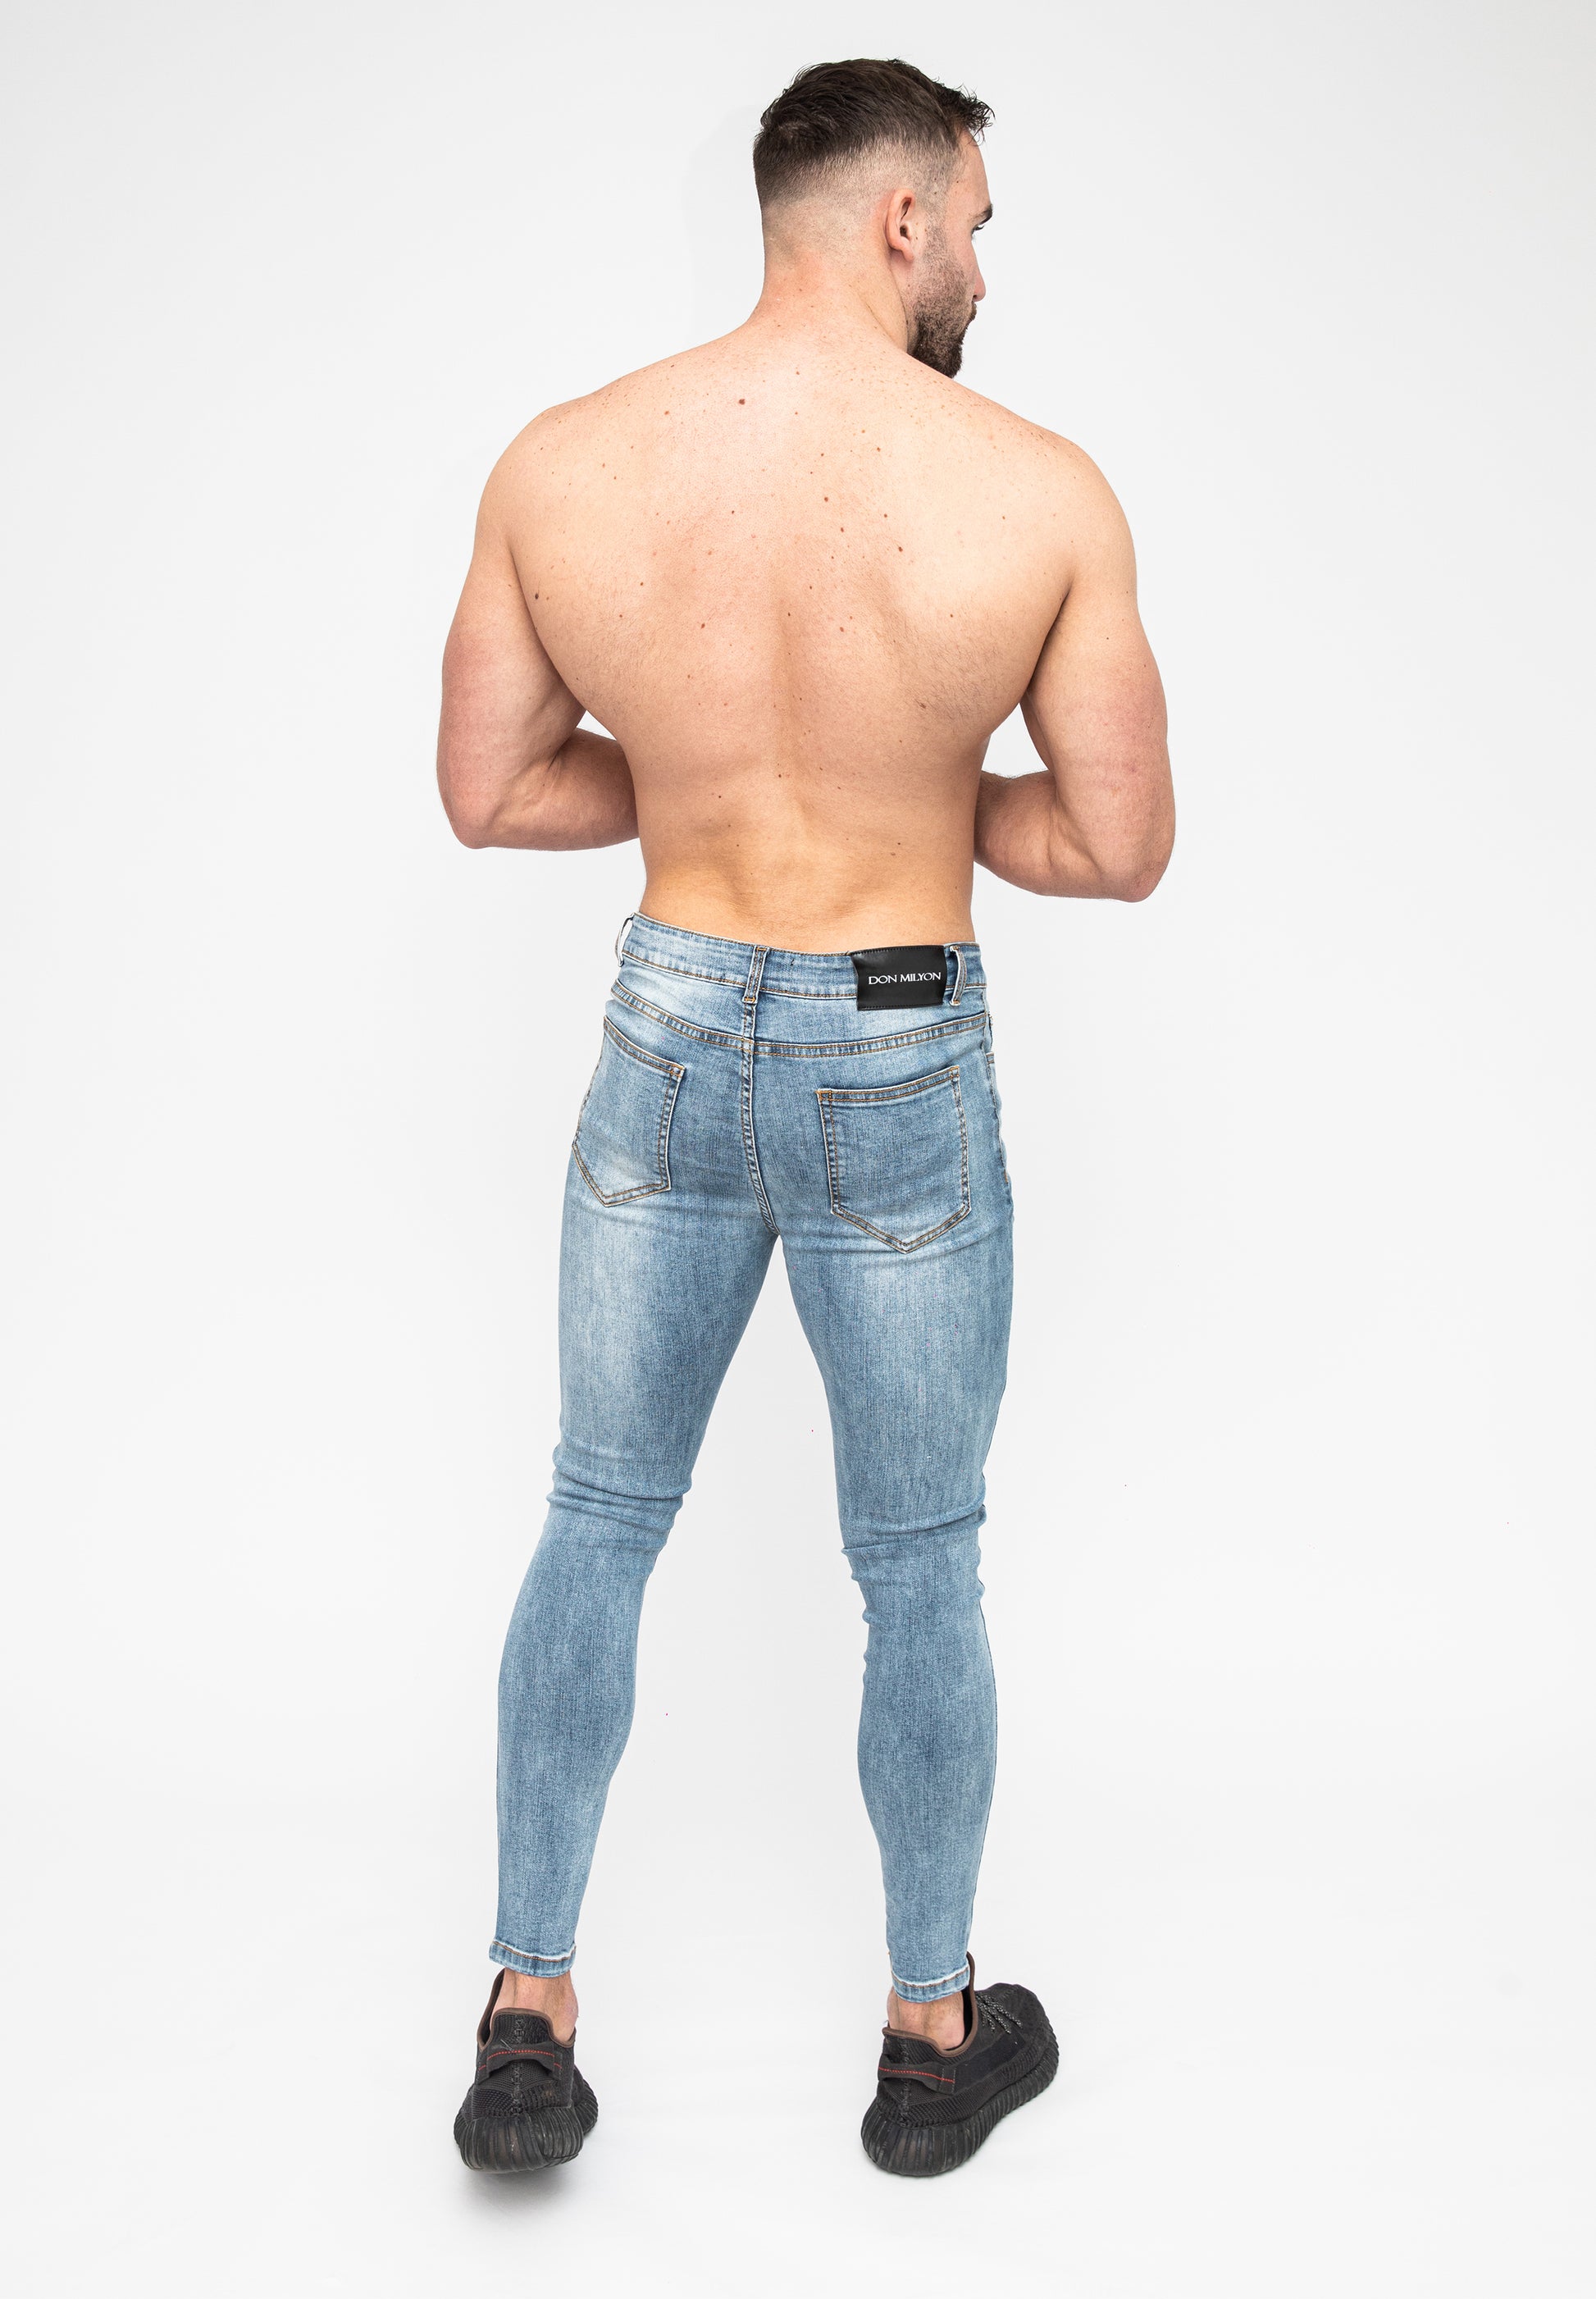 Blue Ripped Skinny Men's Jeans Pose Rear Glutes